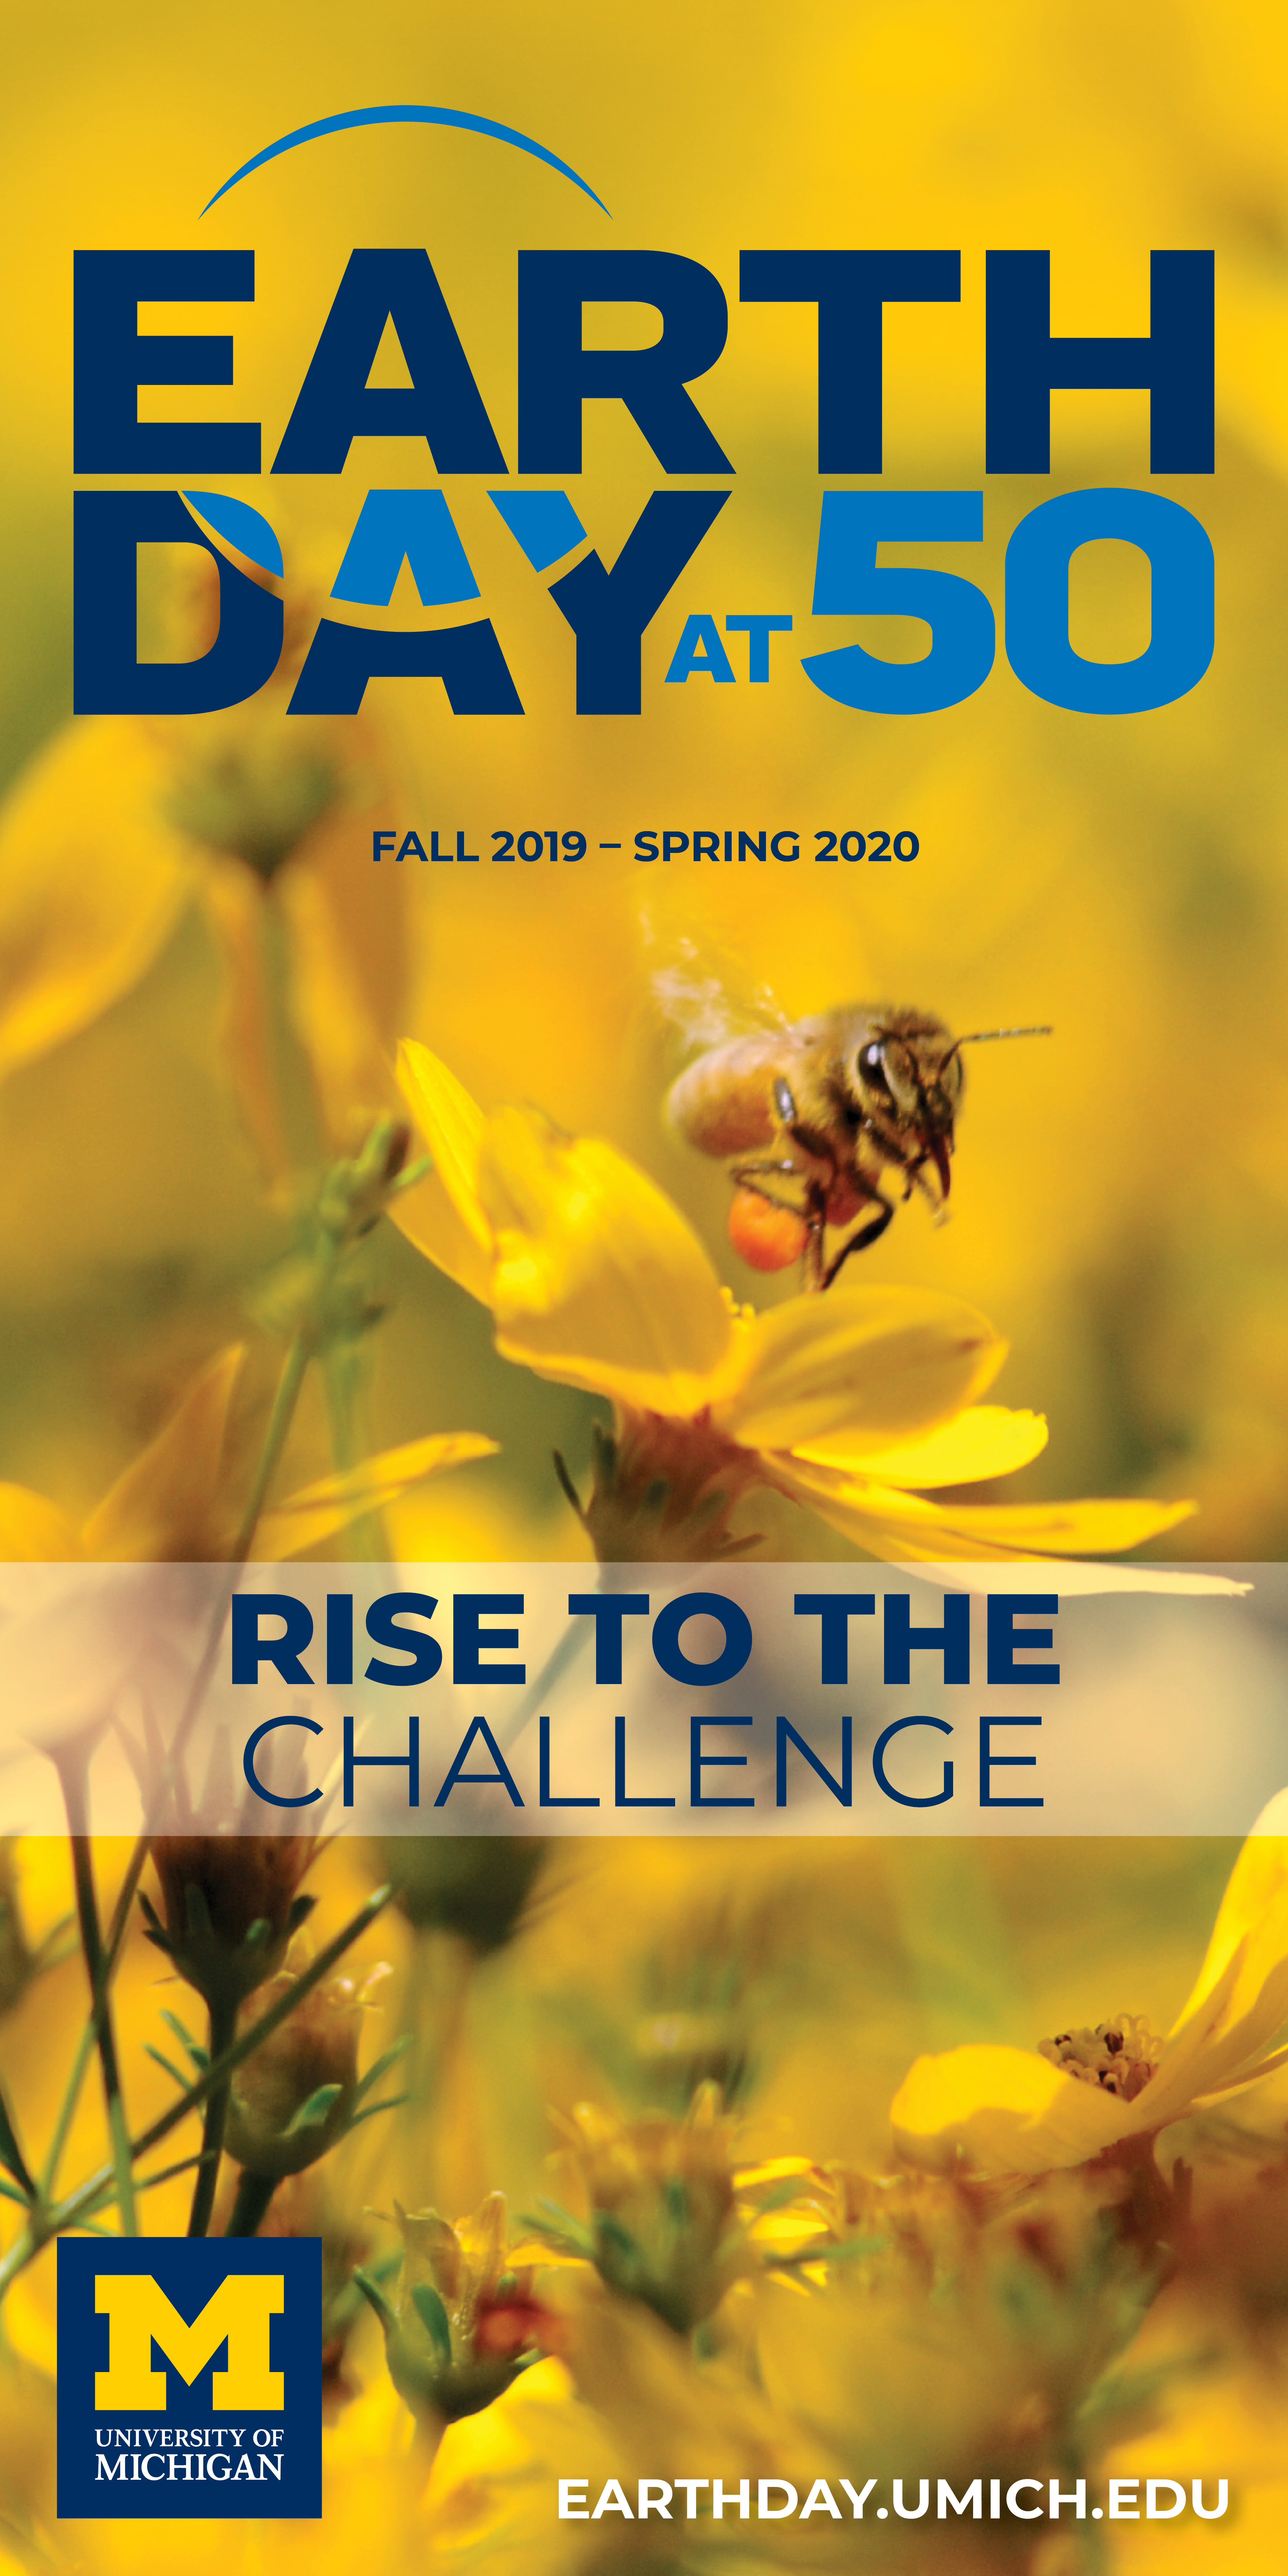 Earth Day 50, bee (BEES!) poster - University of Michigan